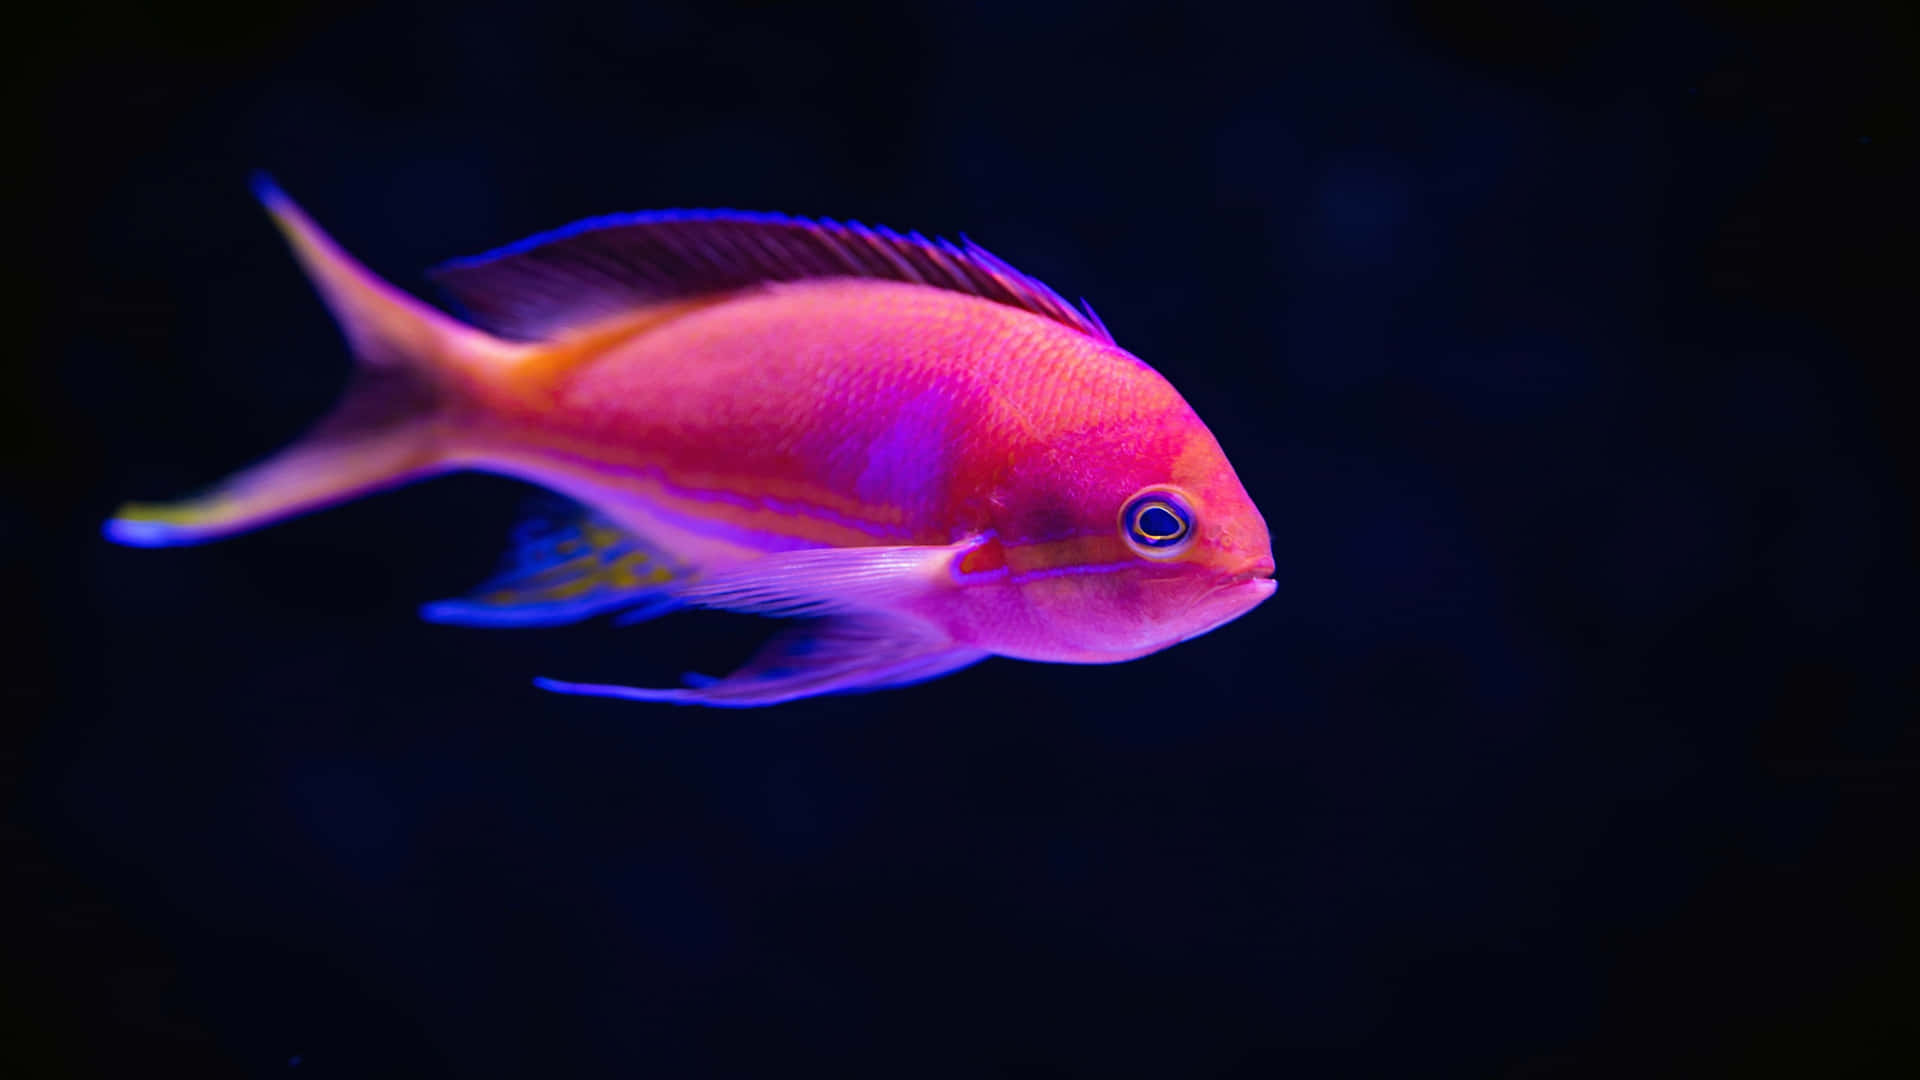 A Pink And Purple Fish Swimming In A Dark Tank Wallpaper